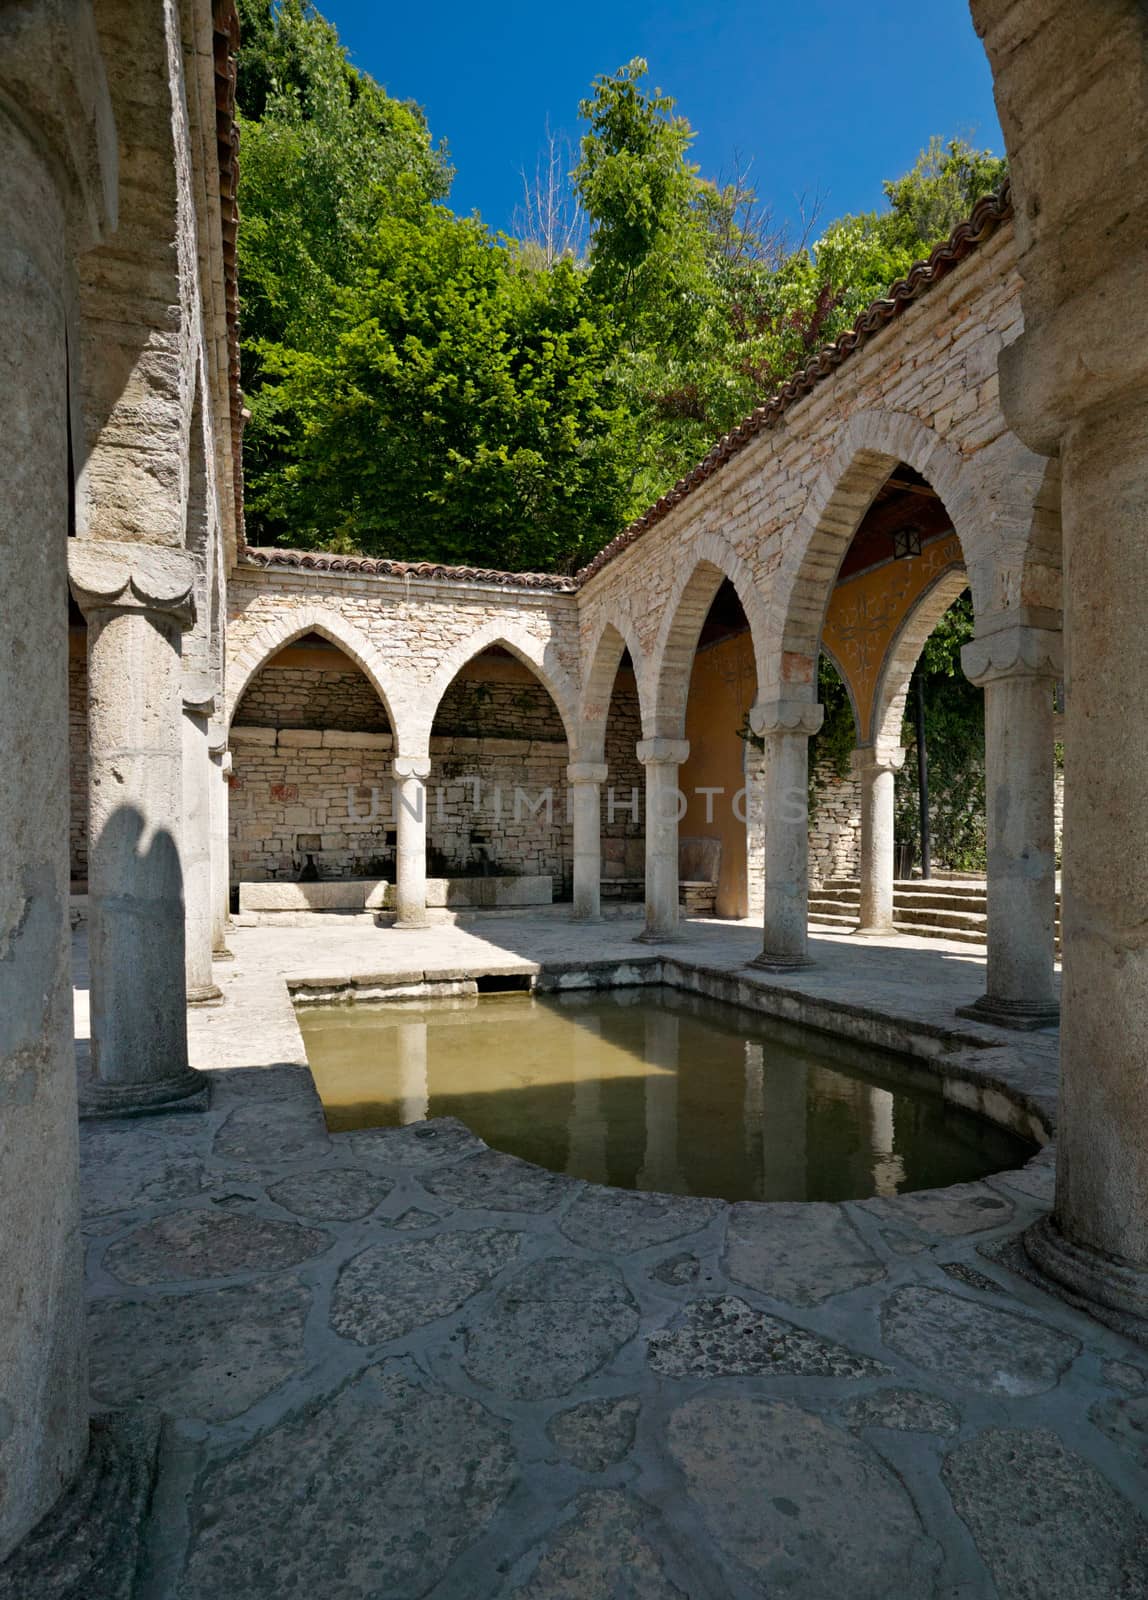 Details from the architecture of the garden building of the Balchik palace, Bulagria